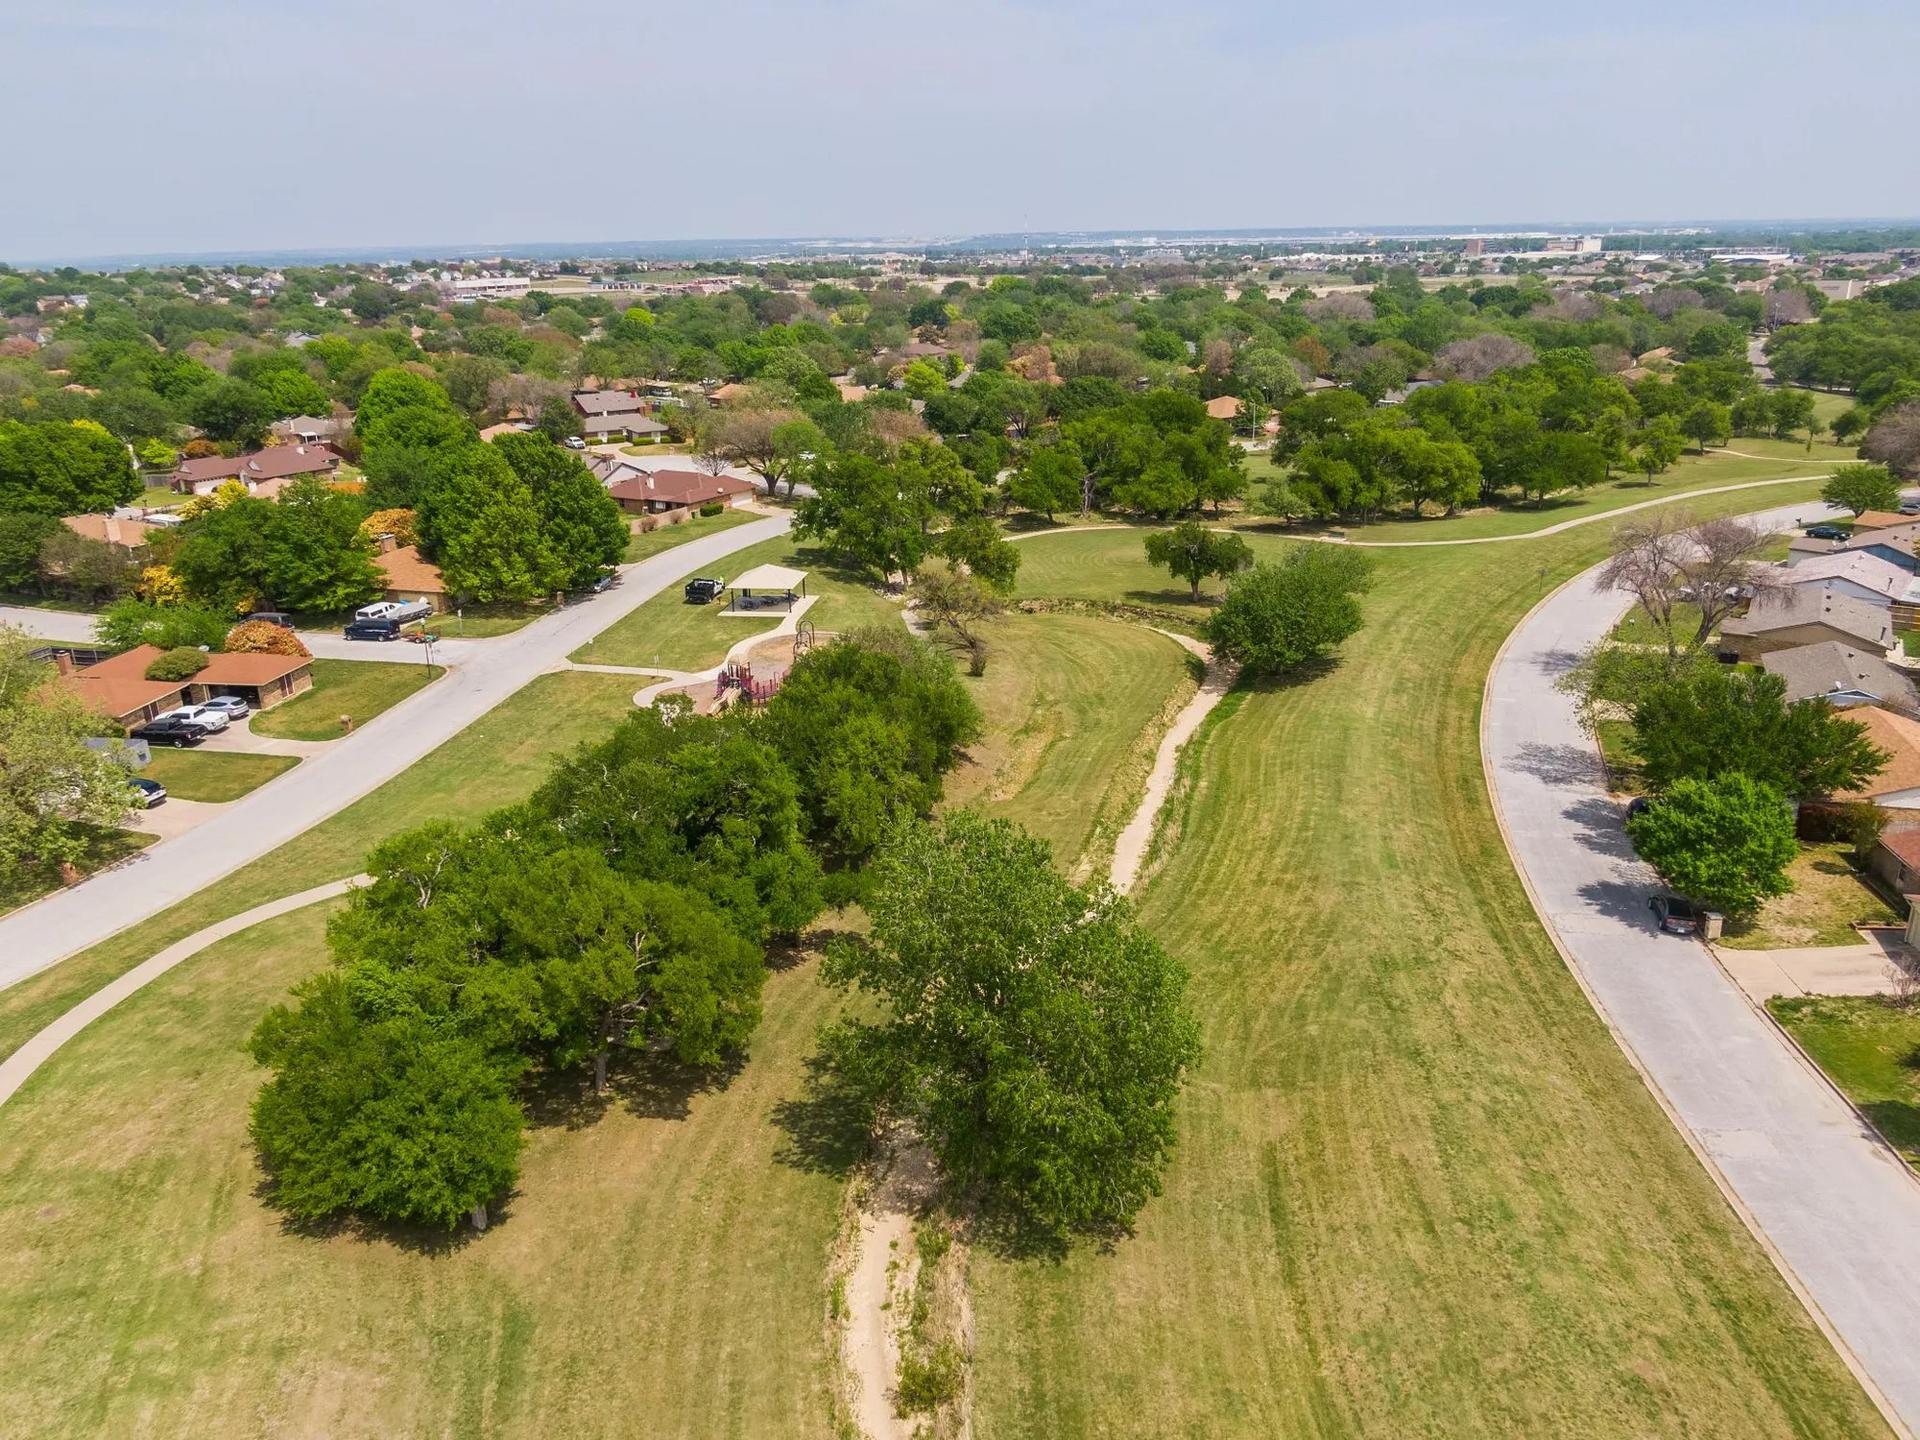 New Homes in Fort Worth, TX